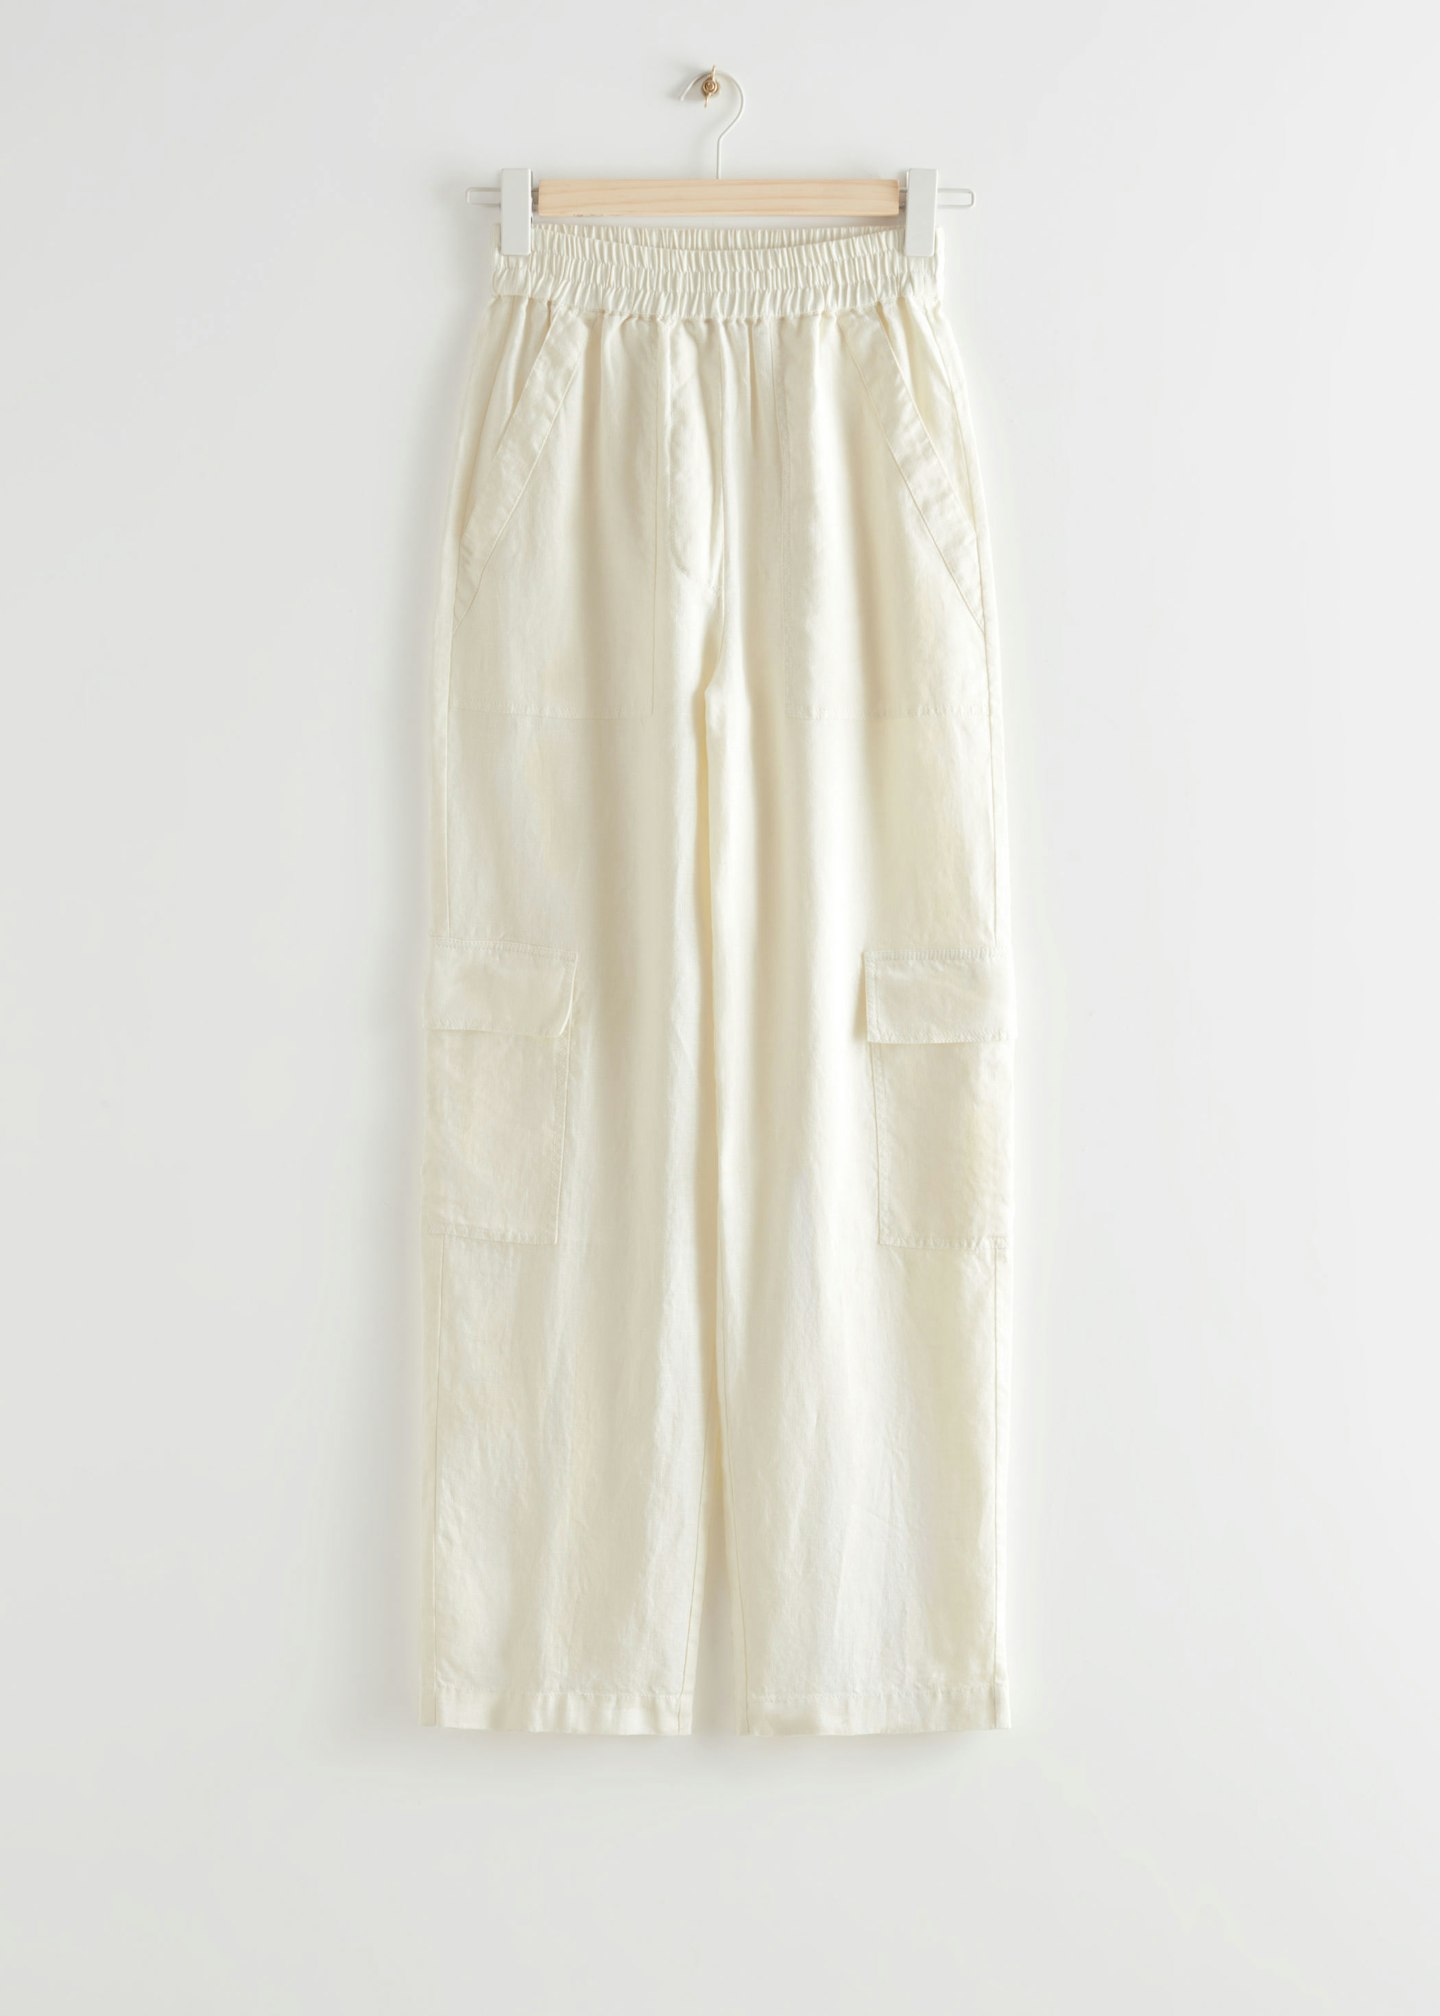 & Other Stories, Wide Utility Pocket Linen Trousers, £85